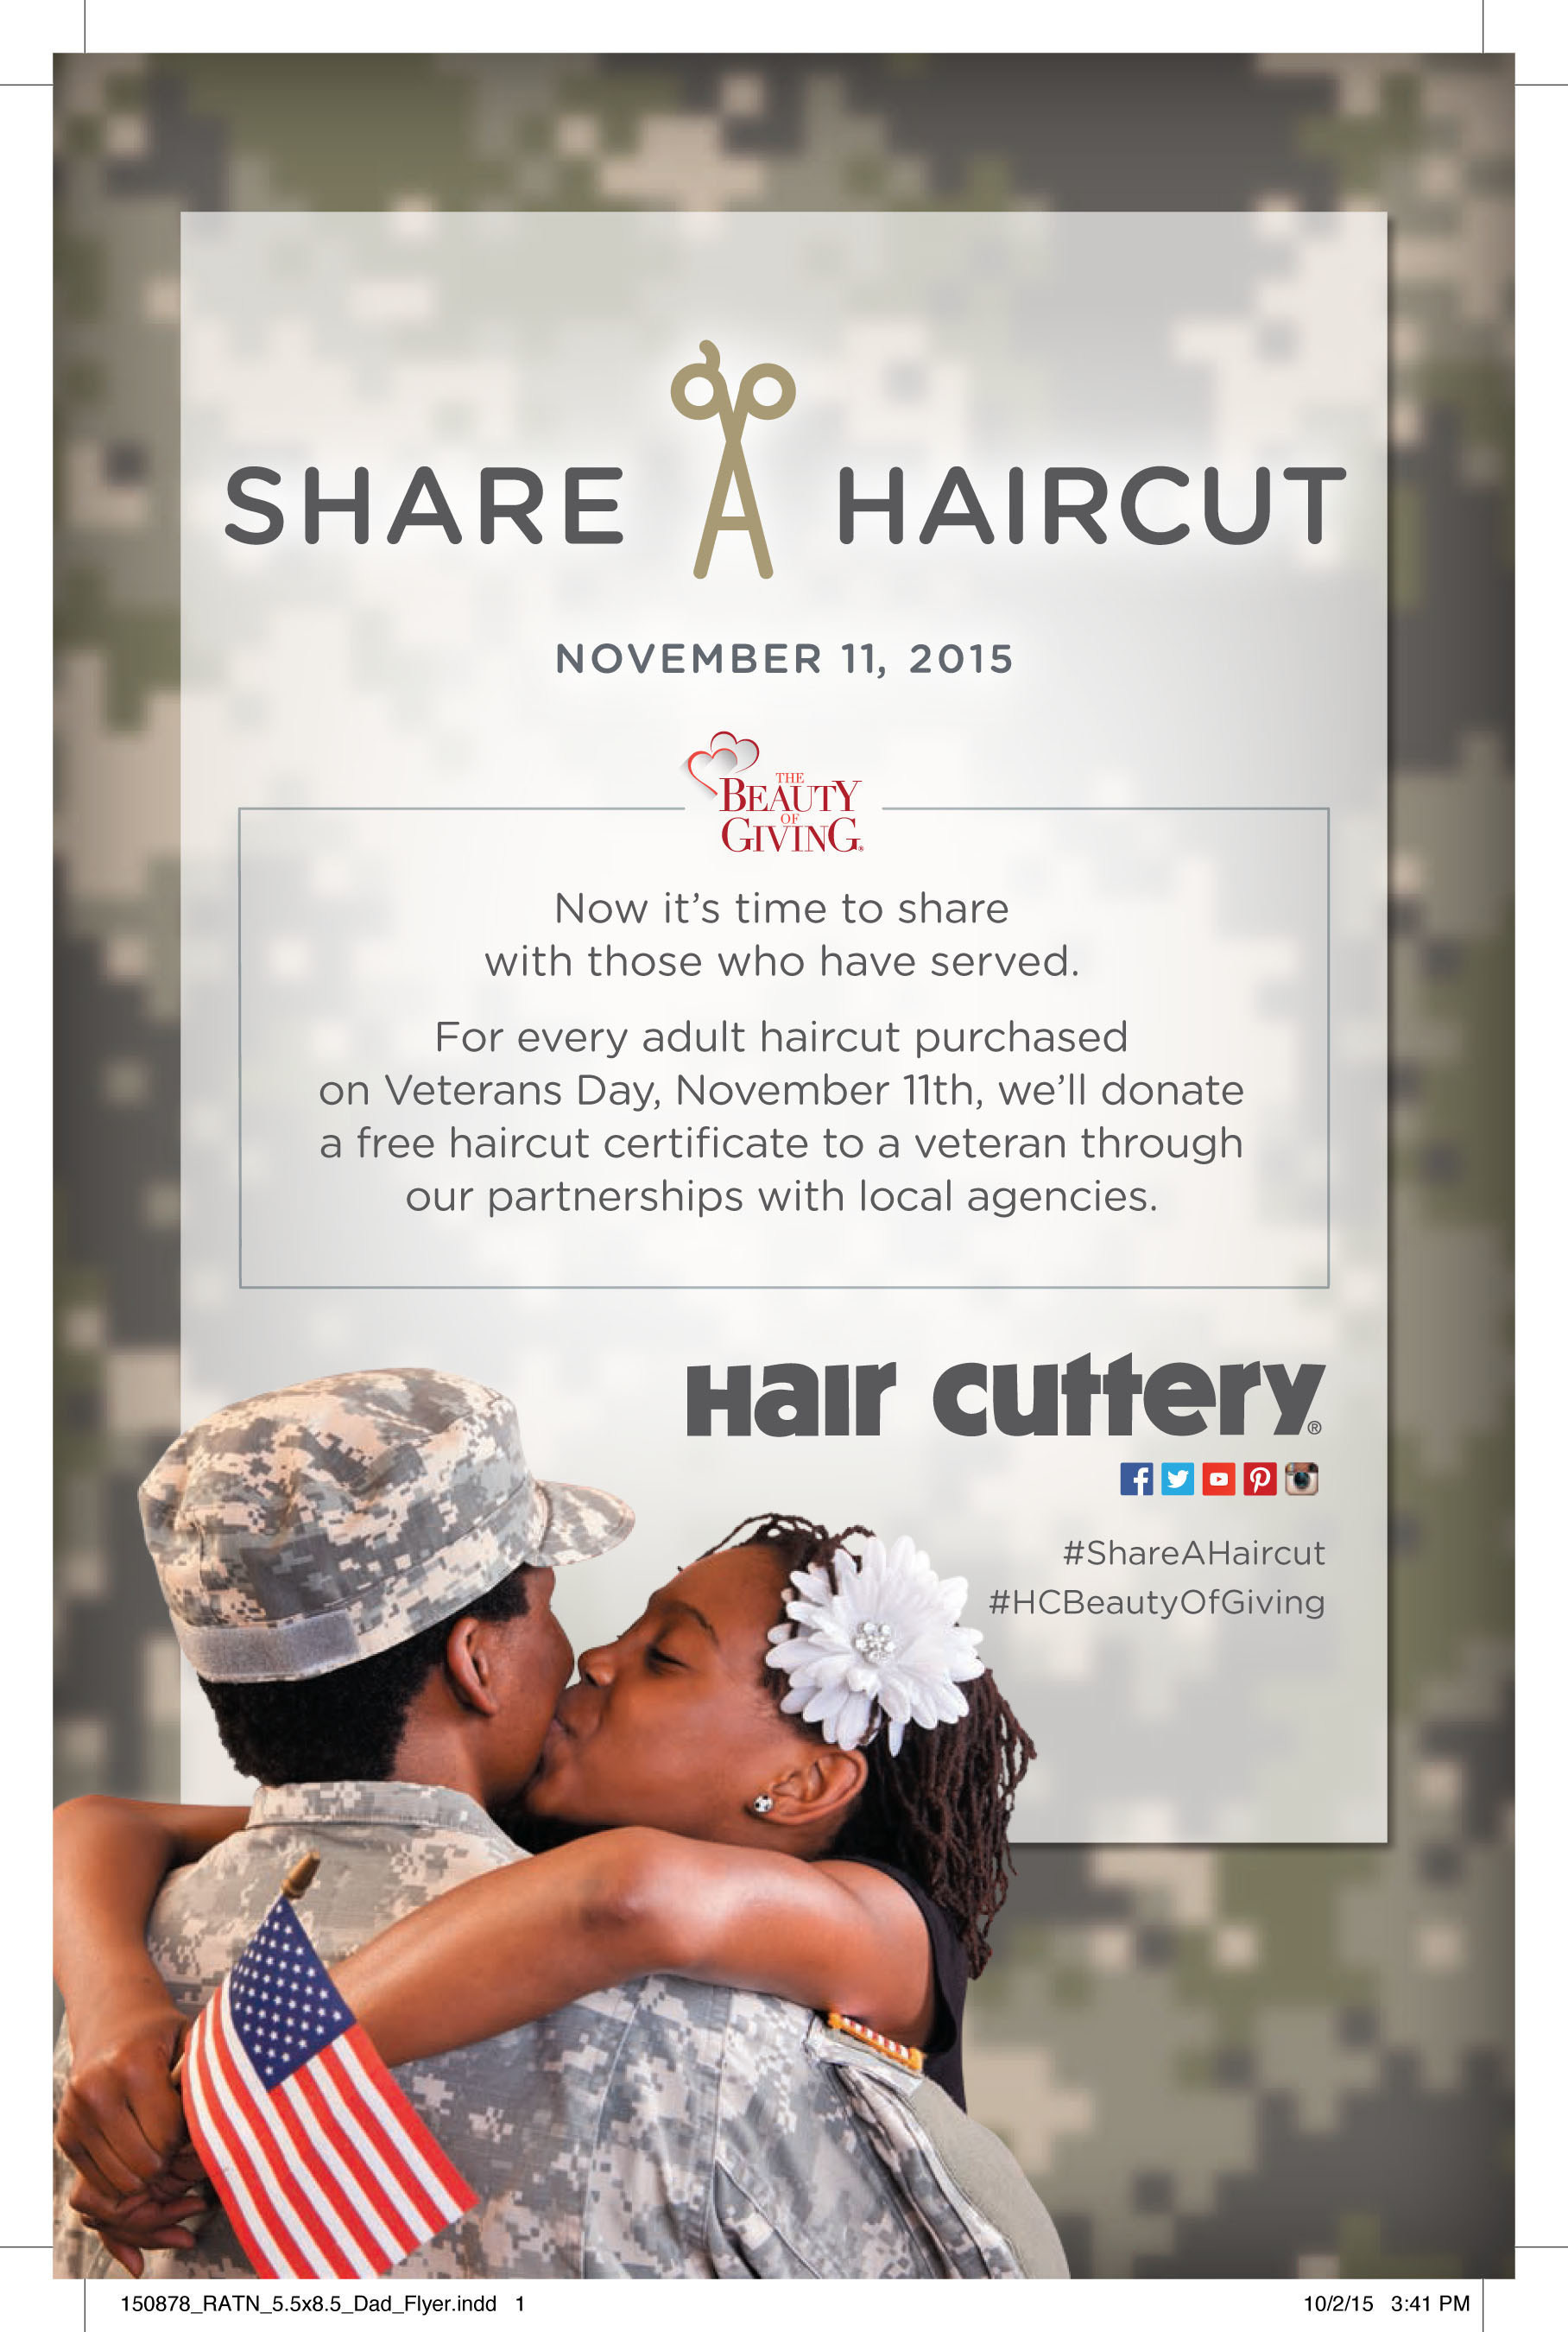 This Veterans Day, join Hair Cuttery in recognizing and giving back to former service men and women through its Share-A-Haircut program.